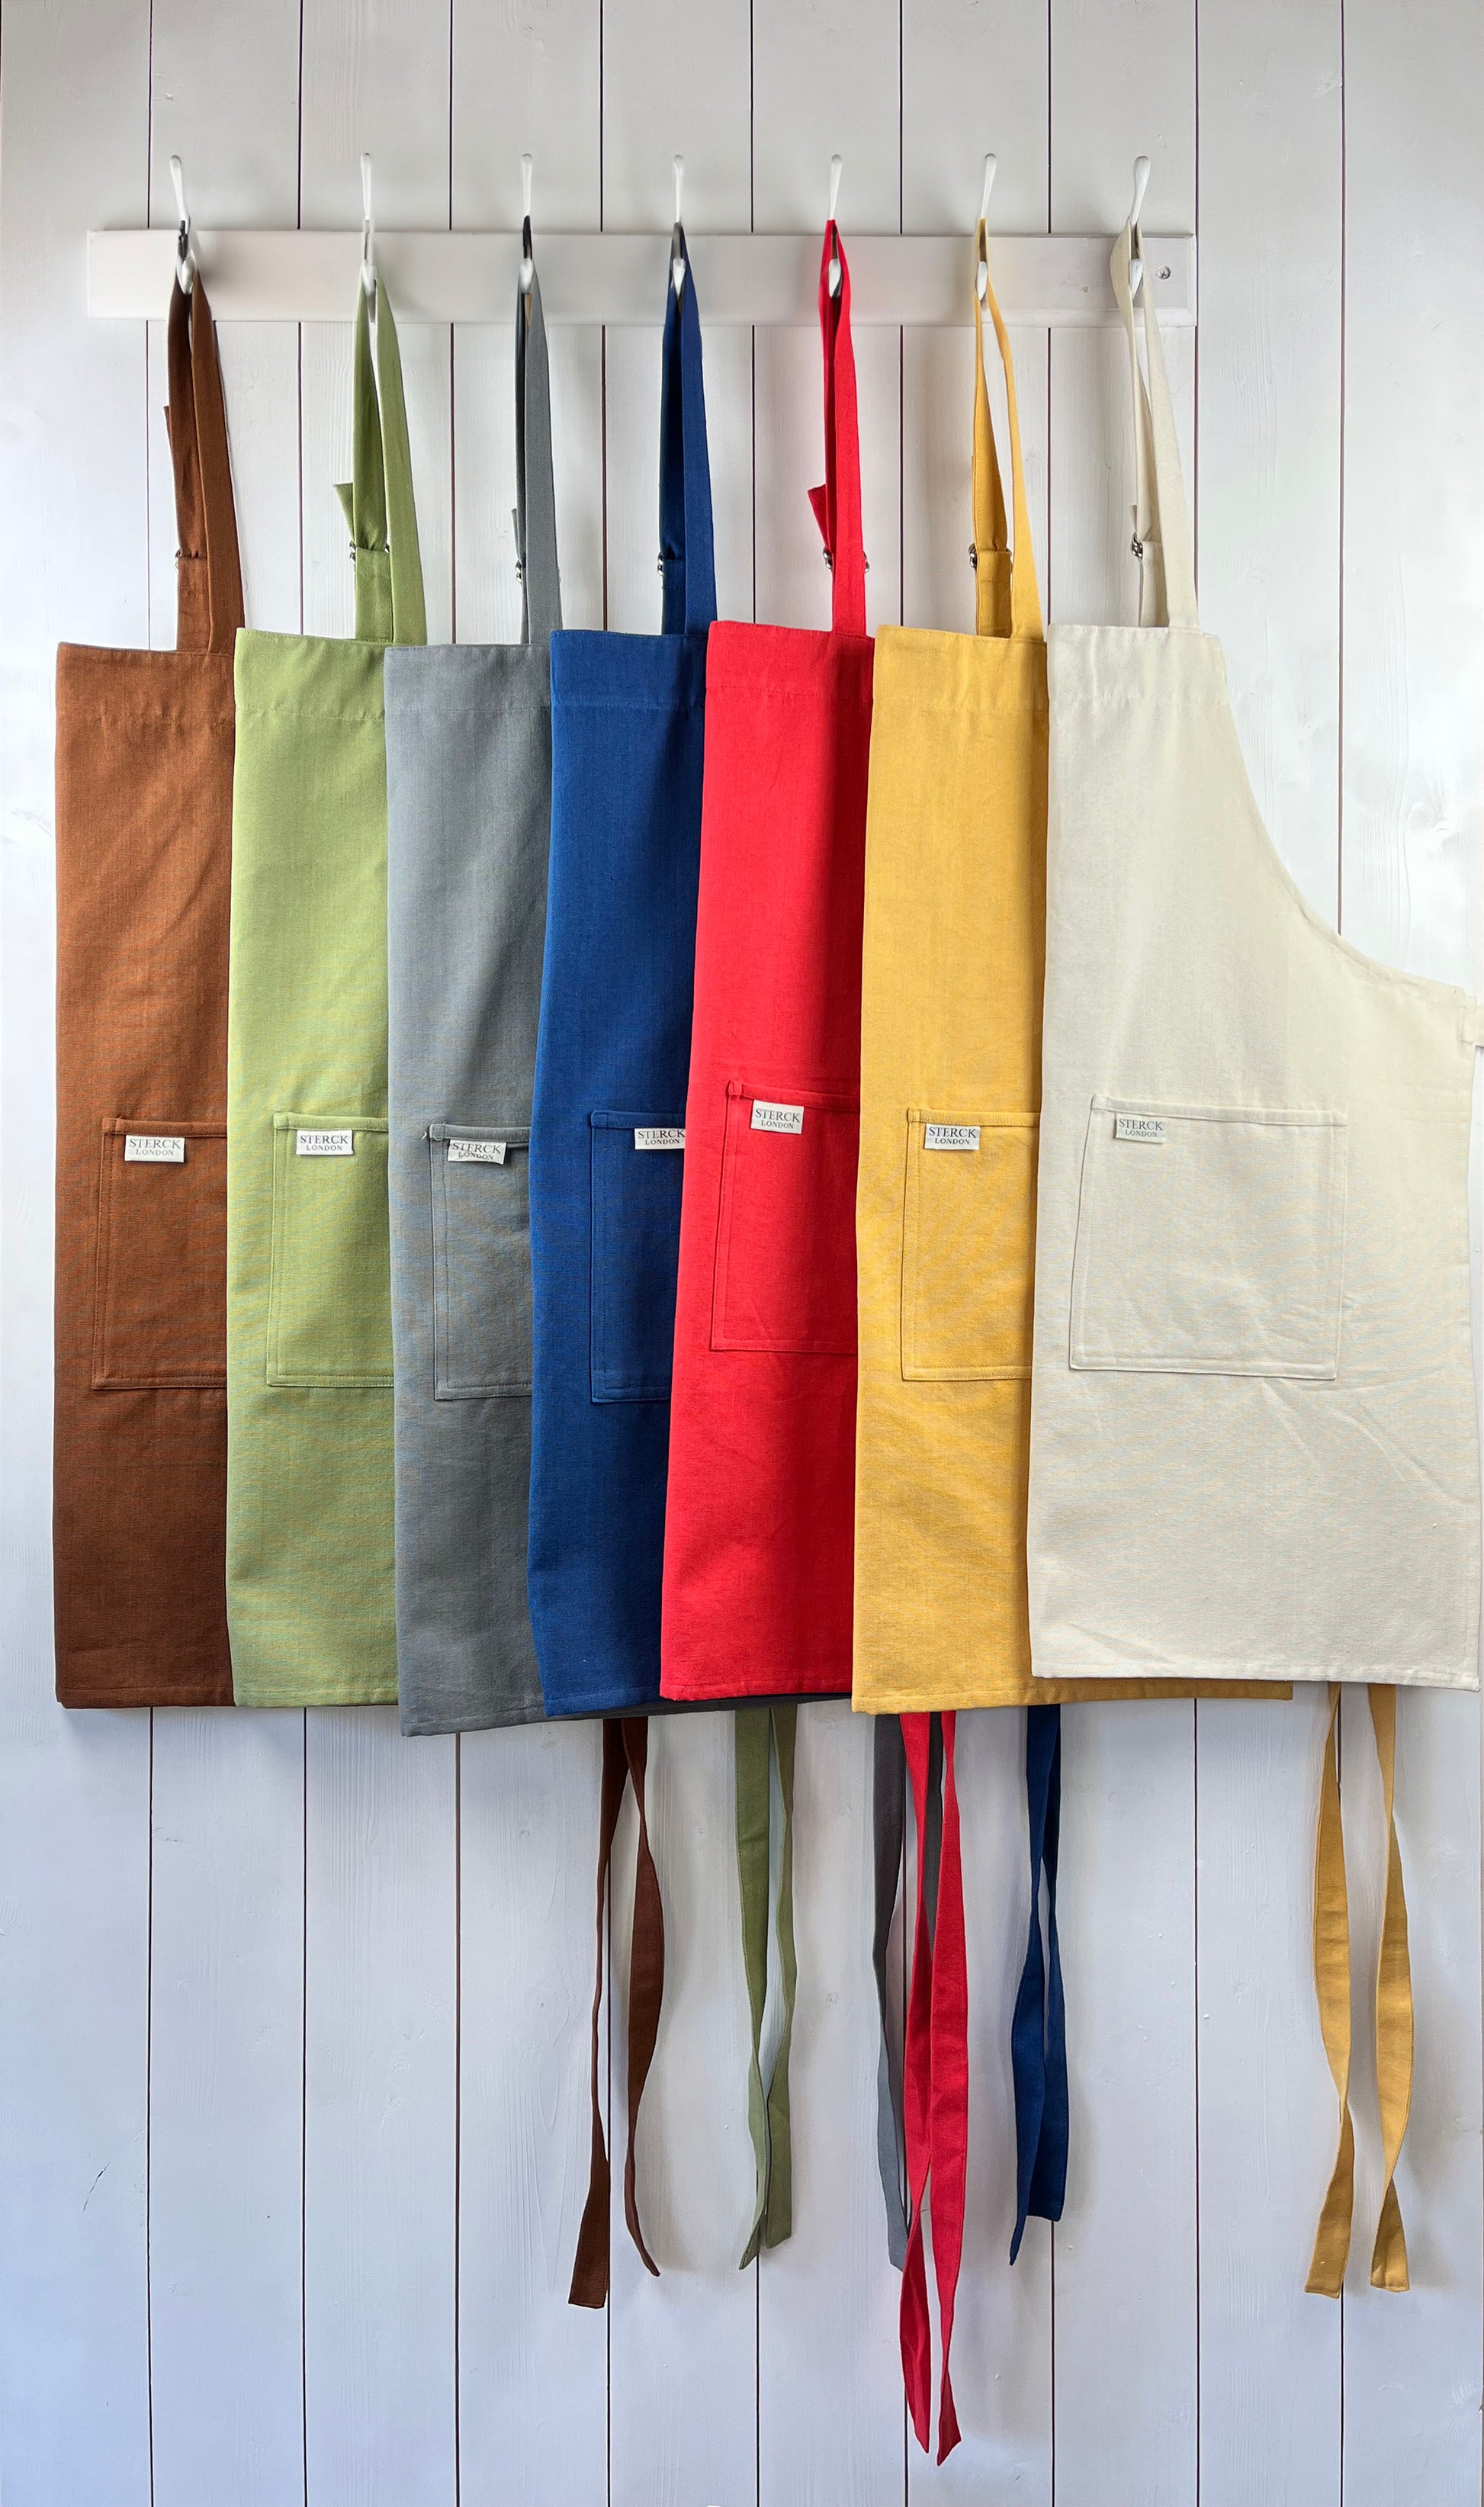 Carom collection. Boldly coloured cotton aprons from Sterck & Co.